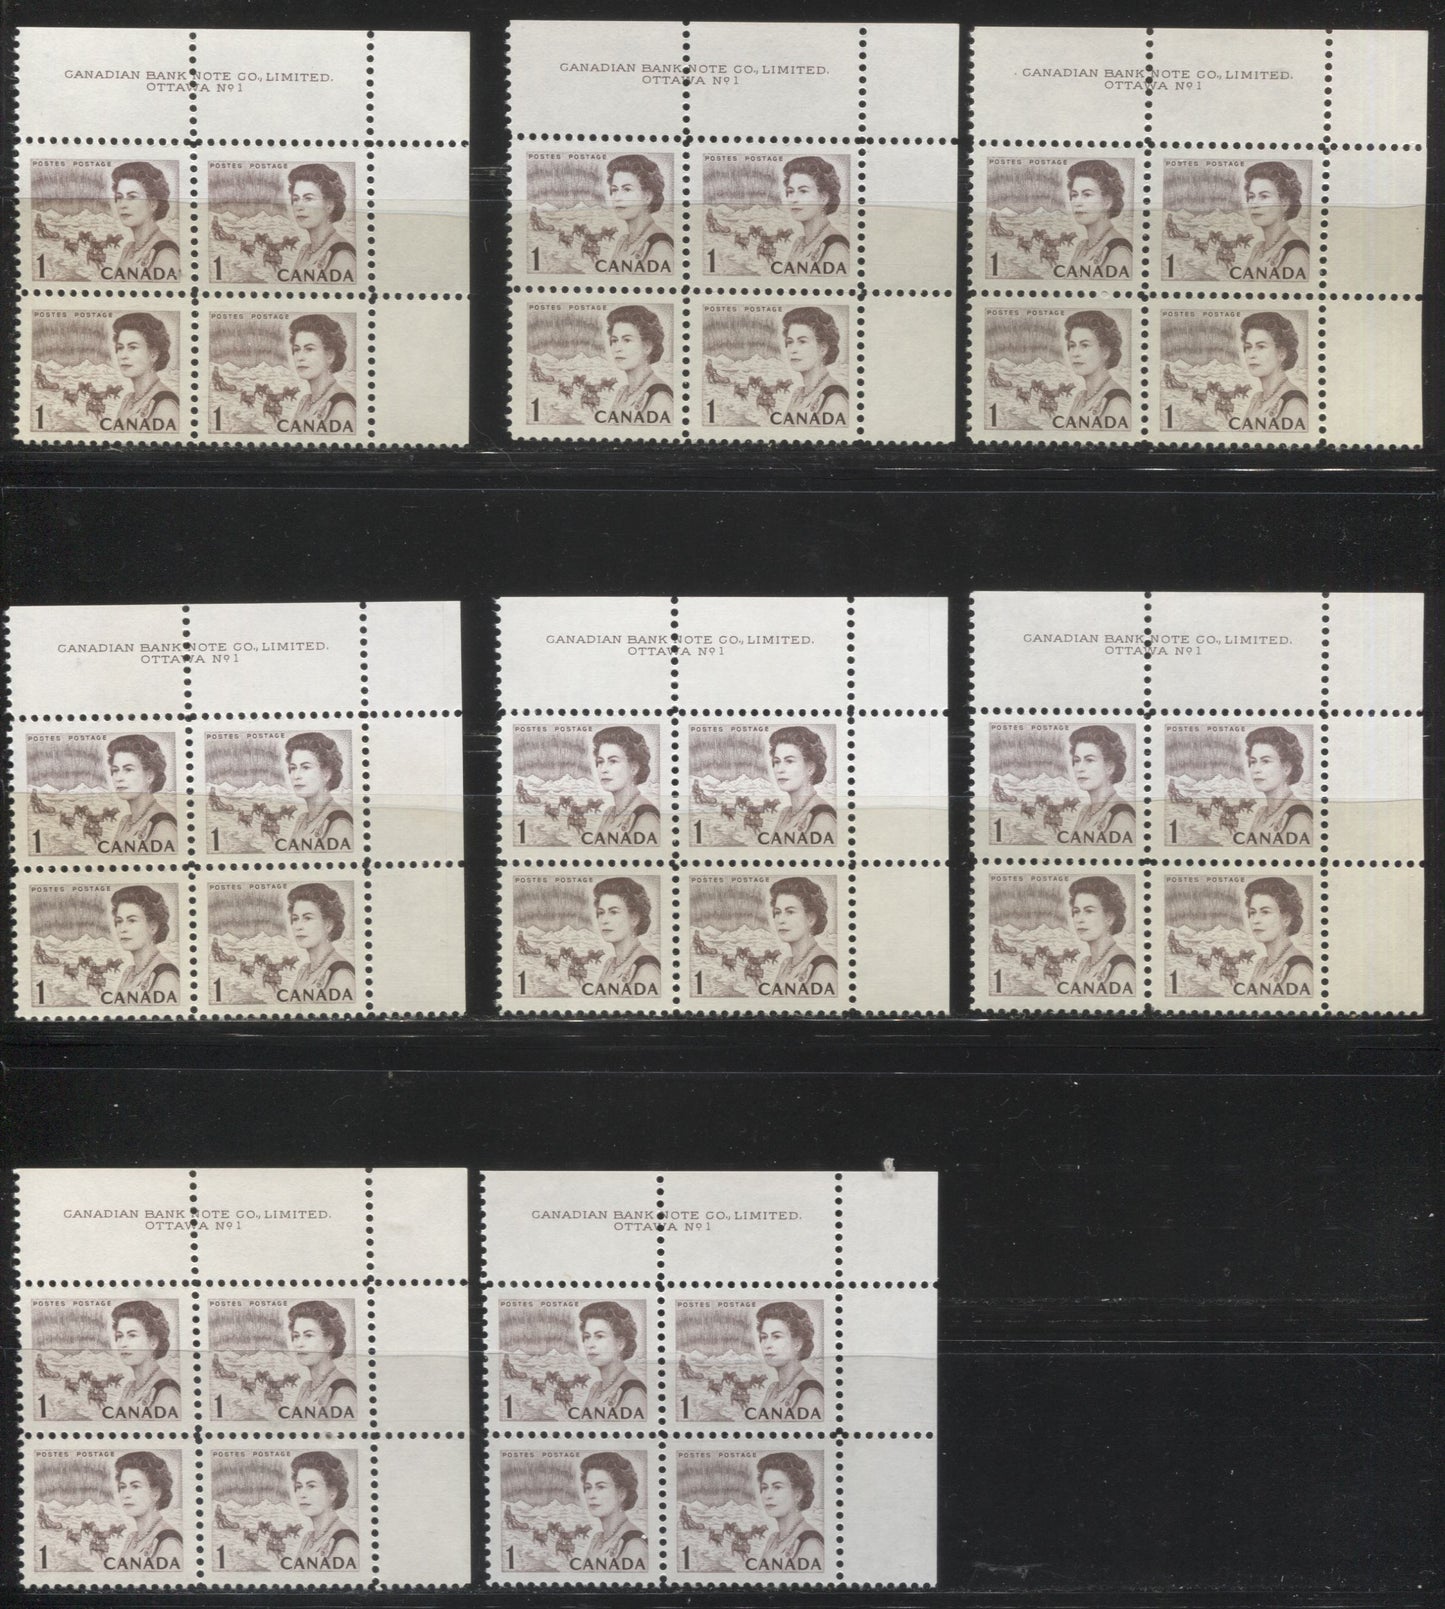 Lot #98 Canada #454 1c Brown & Violet Brown, Northern Lights and Dogsled Team, 1967-1973 Centennial Issue, A Specialized Lot of Plate 1 UR Blocks on DF and NF Papers